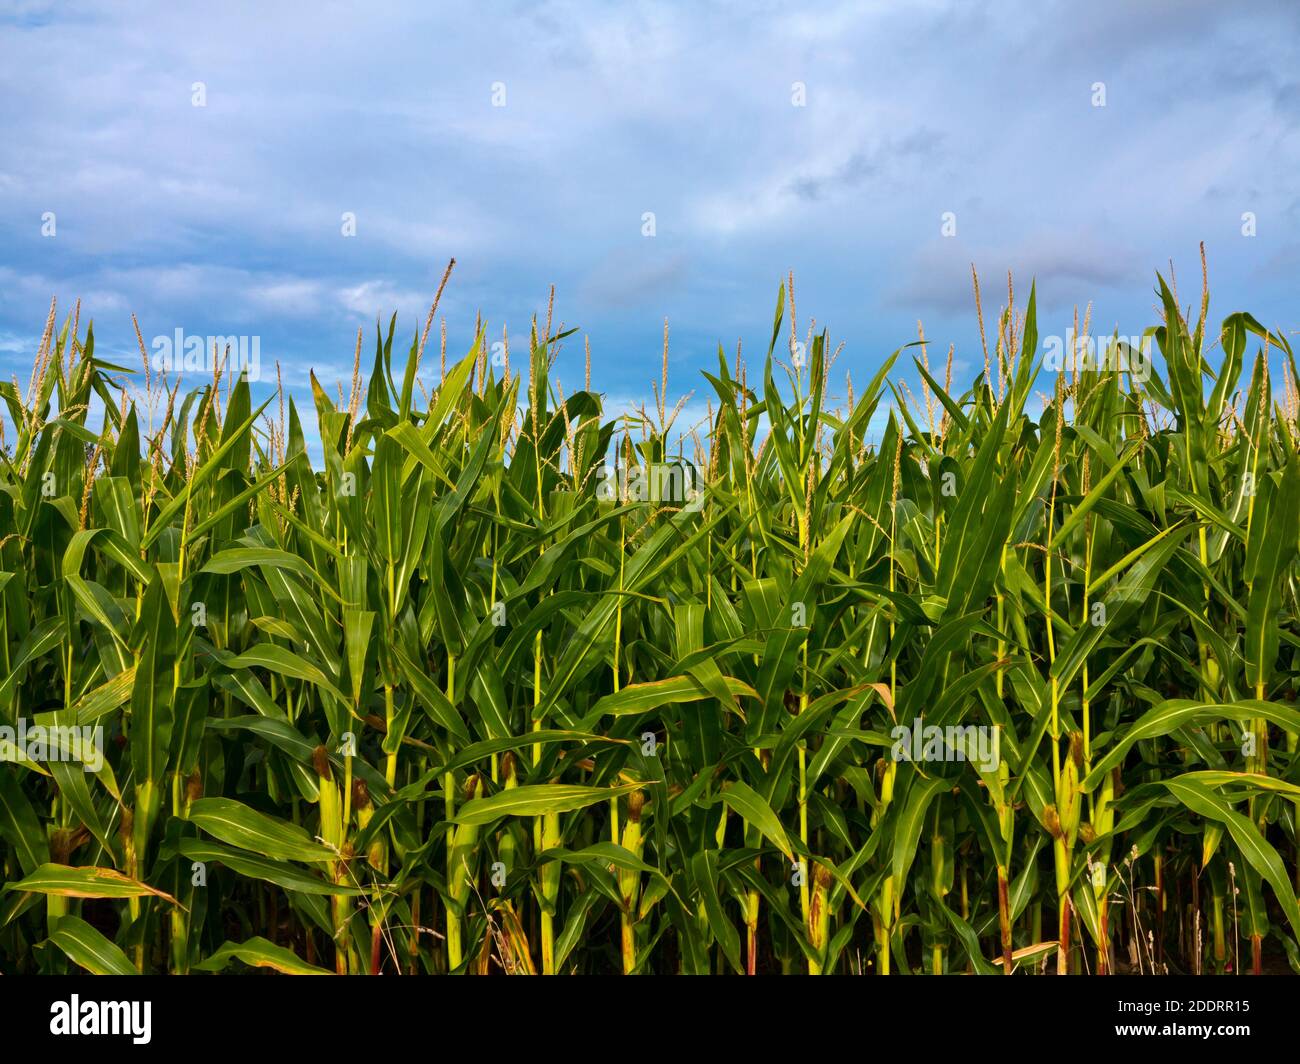 Field of maize or corn a cereal crop grown for food. Stock Photo